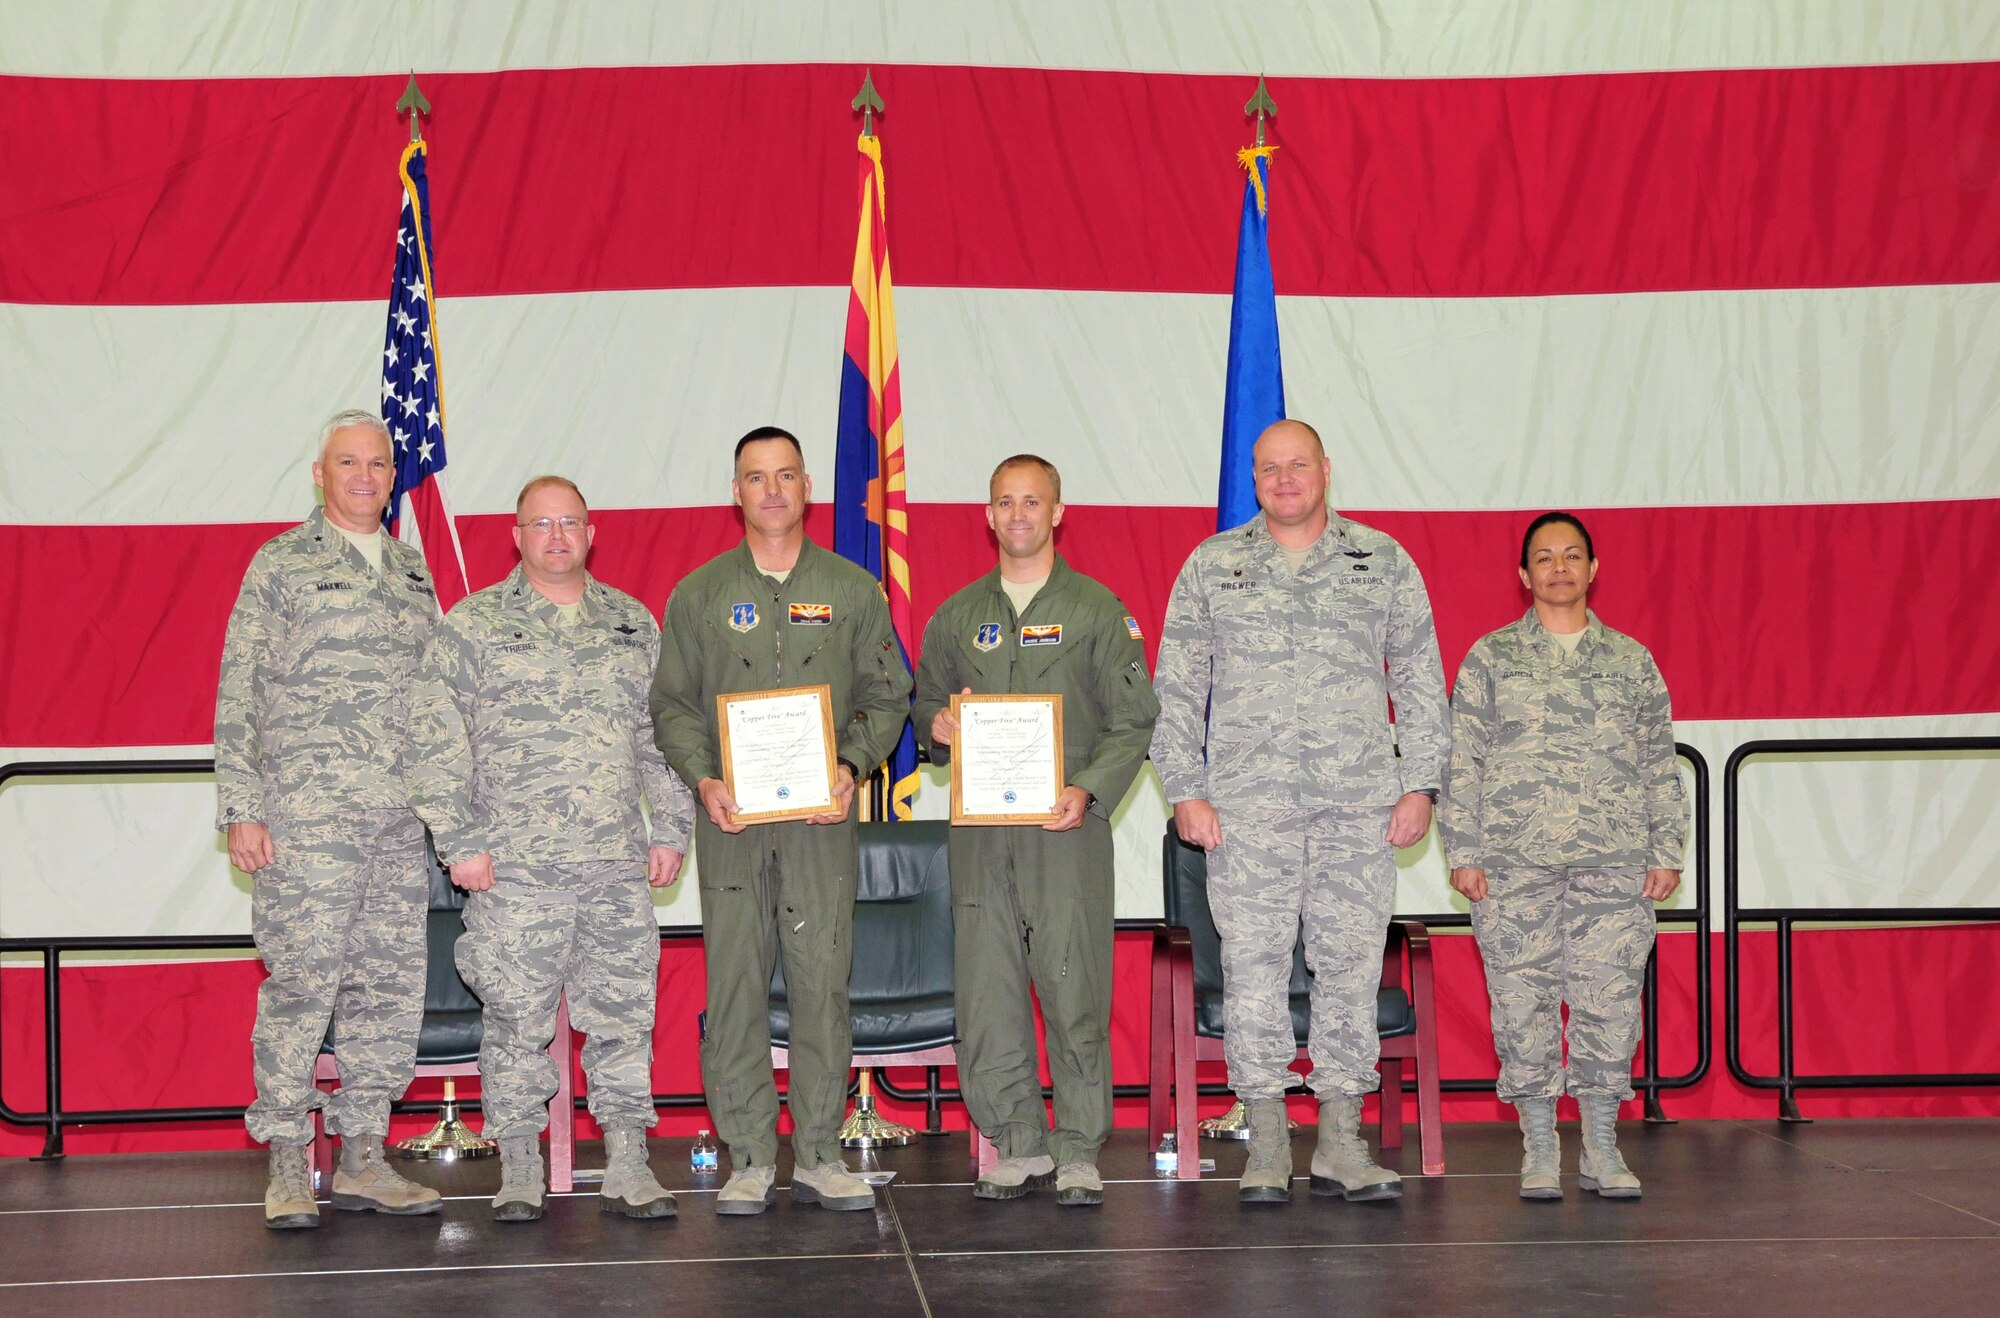 The 161st Air Refueling Wing, Phoenix Air National Guard Base, held its annual awards ceremony March 8.  The Copper Five award is presented to aircrew members who have best represented the professional skills and leadership demonstrated by the crew of Copper Five. From left, U.S. Air Force Brig. Gen. Edward Maxwell, commander of the Arizona Air National Guard; Col. Chris Triebel, 161st Operations Group commander; Lt. Col. Dean Owen, 1st Lt. William Johnson, Col. Gary Brewer, commander of the 161st Air Refueling Wing and Chief Master Sergeant Martha Garcia, 161st Air Refueling Wing command chief. (U. S. Air National Guard photo by Master Sgt. Kelly M. Deitloff)